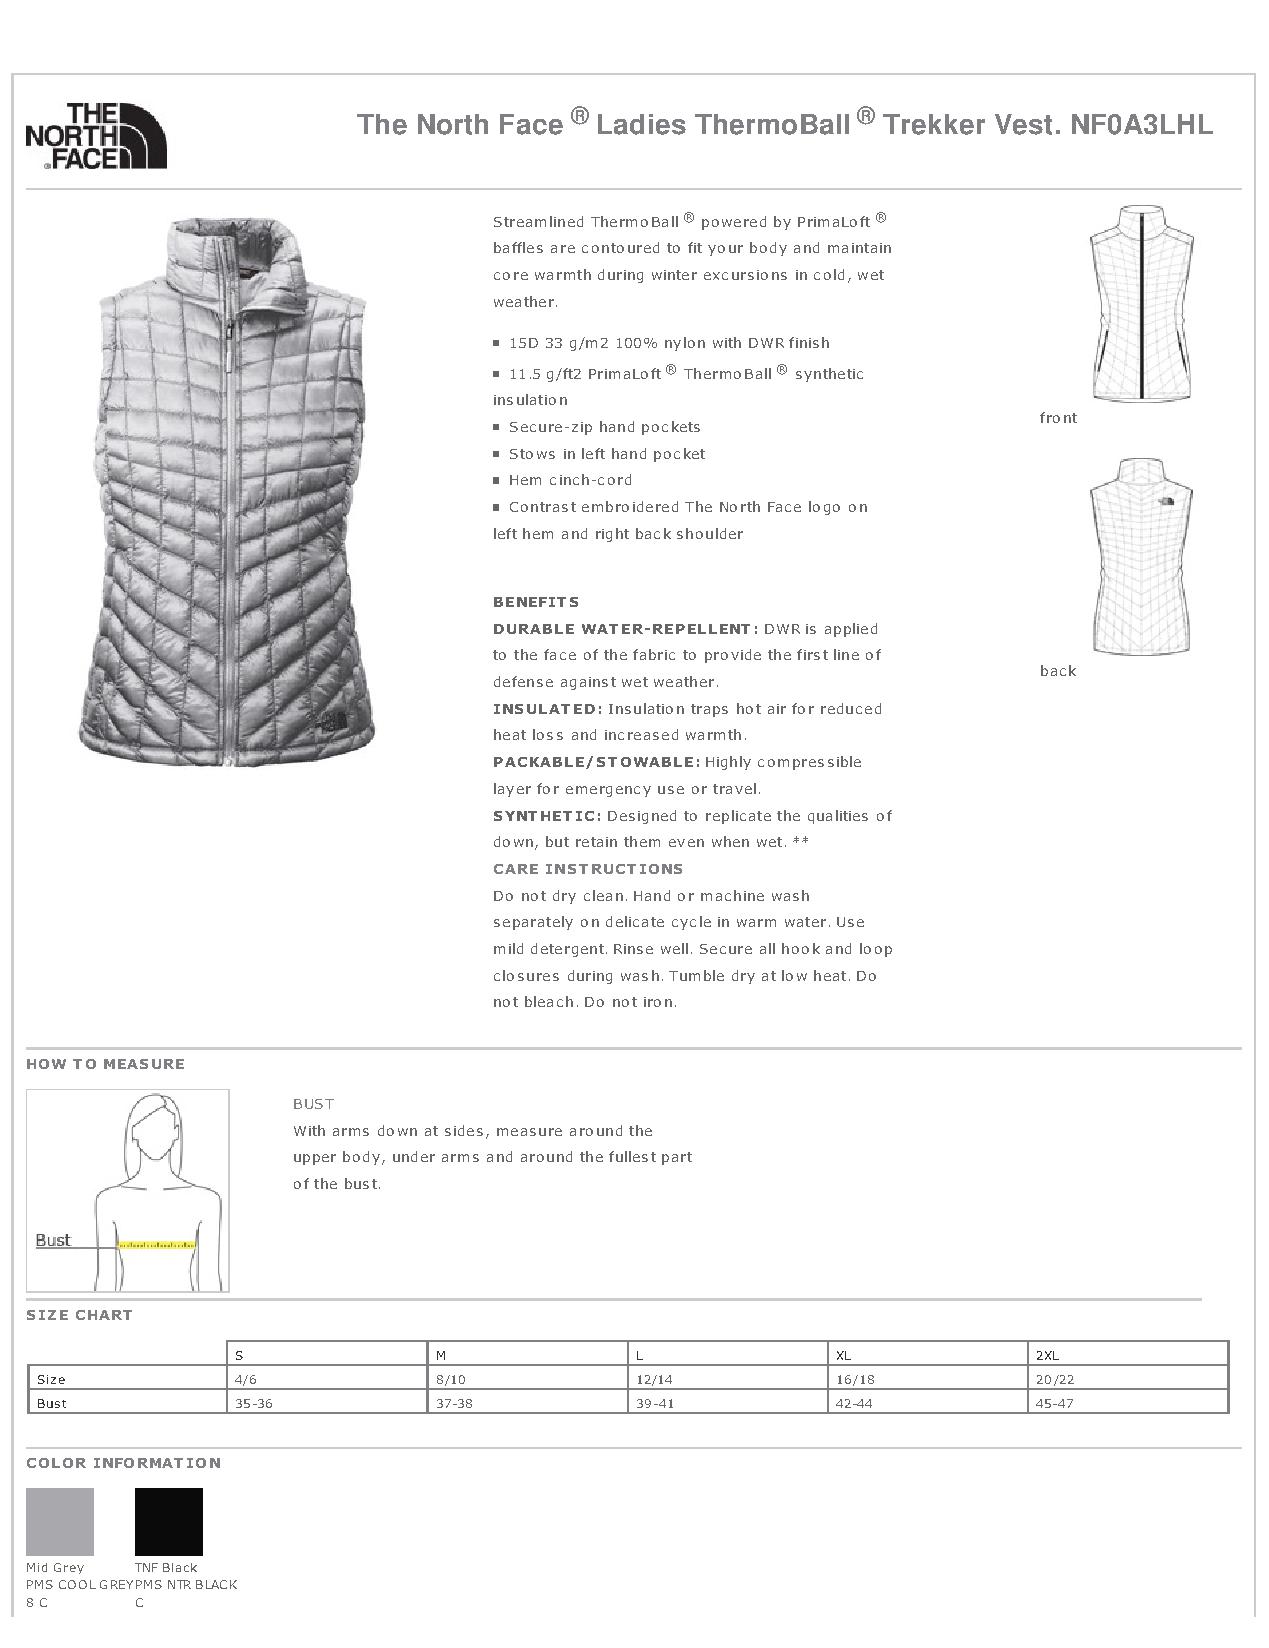 Embroider The North Face® NF0A3LHL - Ladies ThermoBall™ Trekker Vest ...